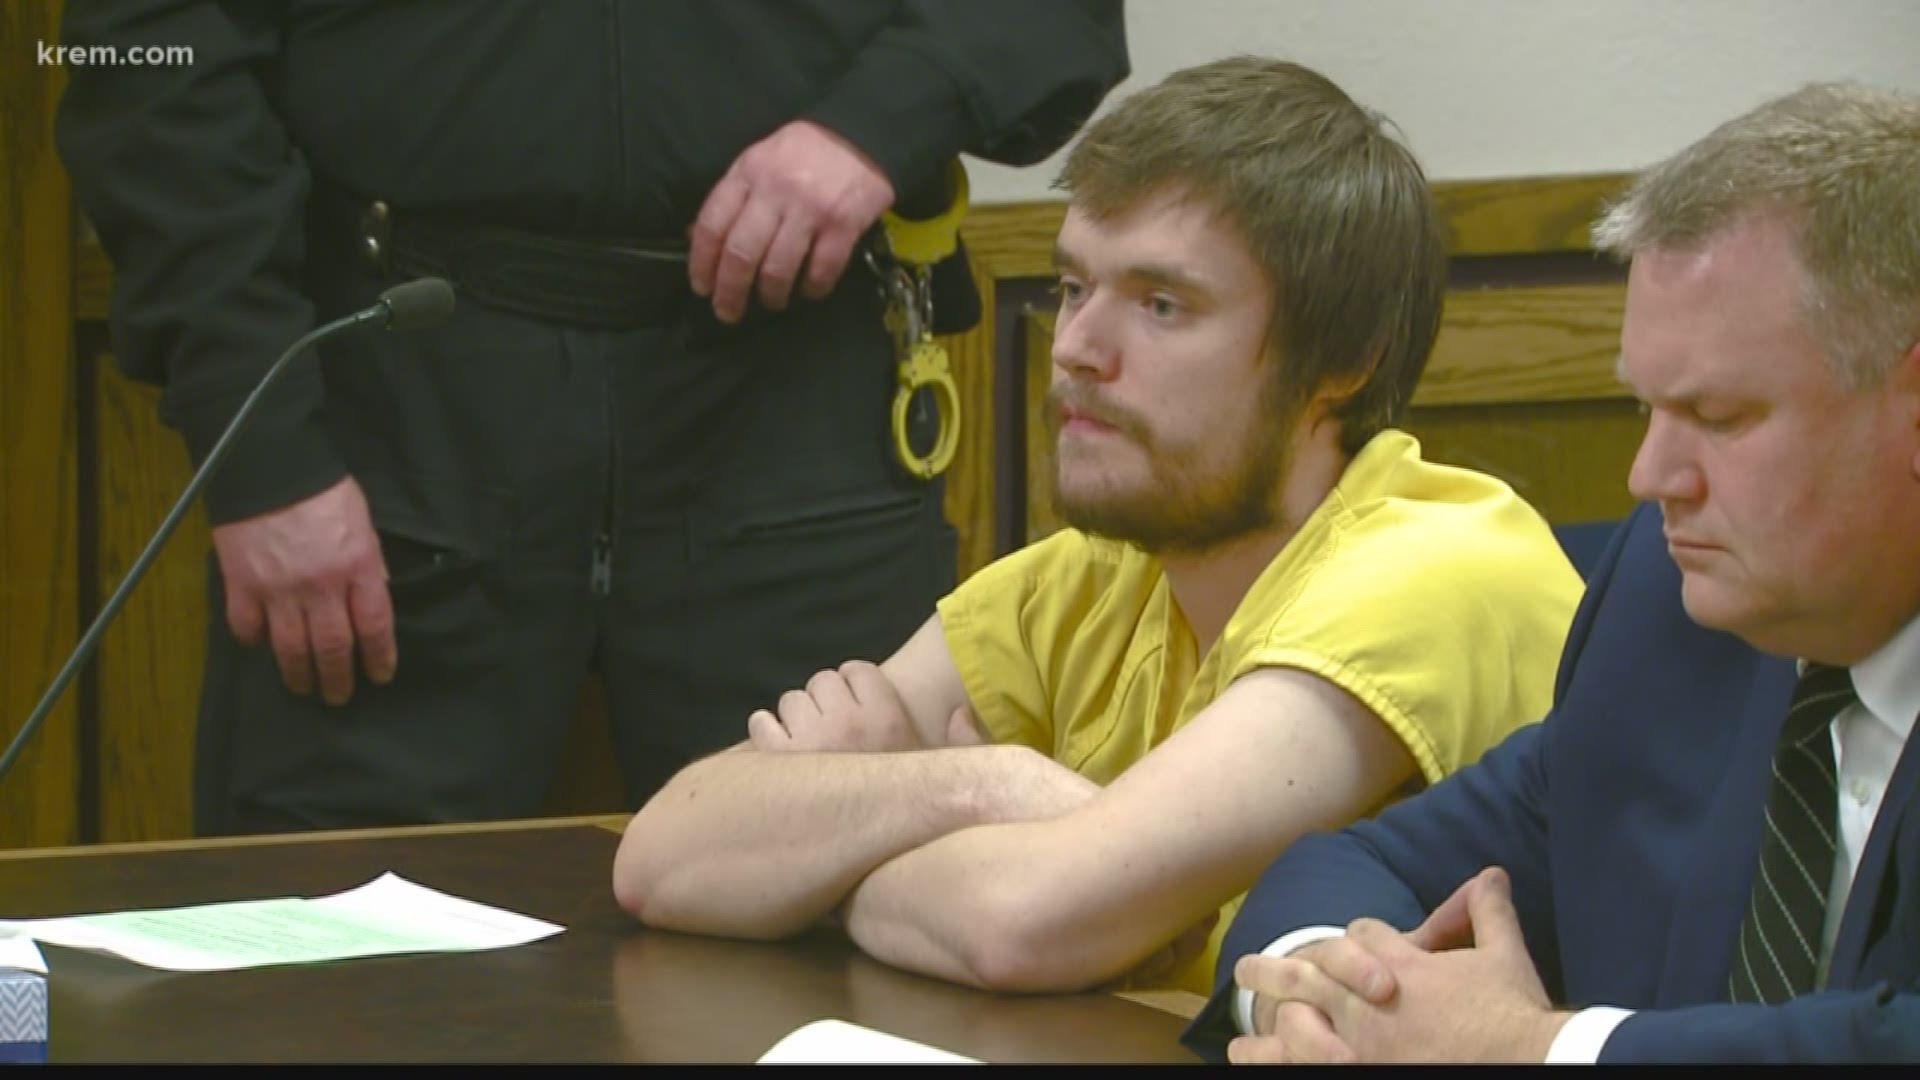 A judge sentenced Joshua Forrester to 19 years in prison for the shooting death of his girlfriend in their Hillyard apartment on Dec. 26.